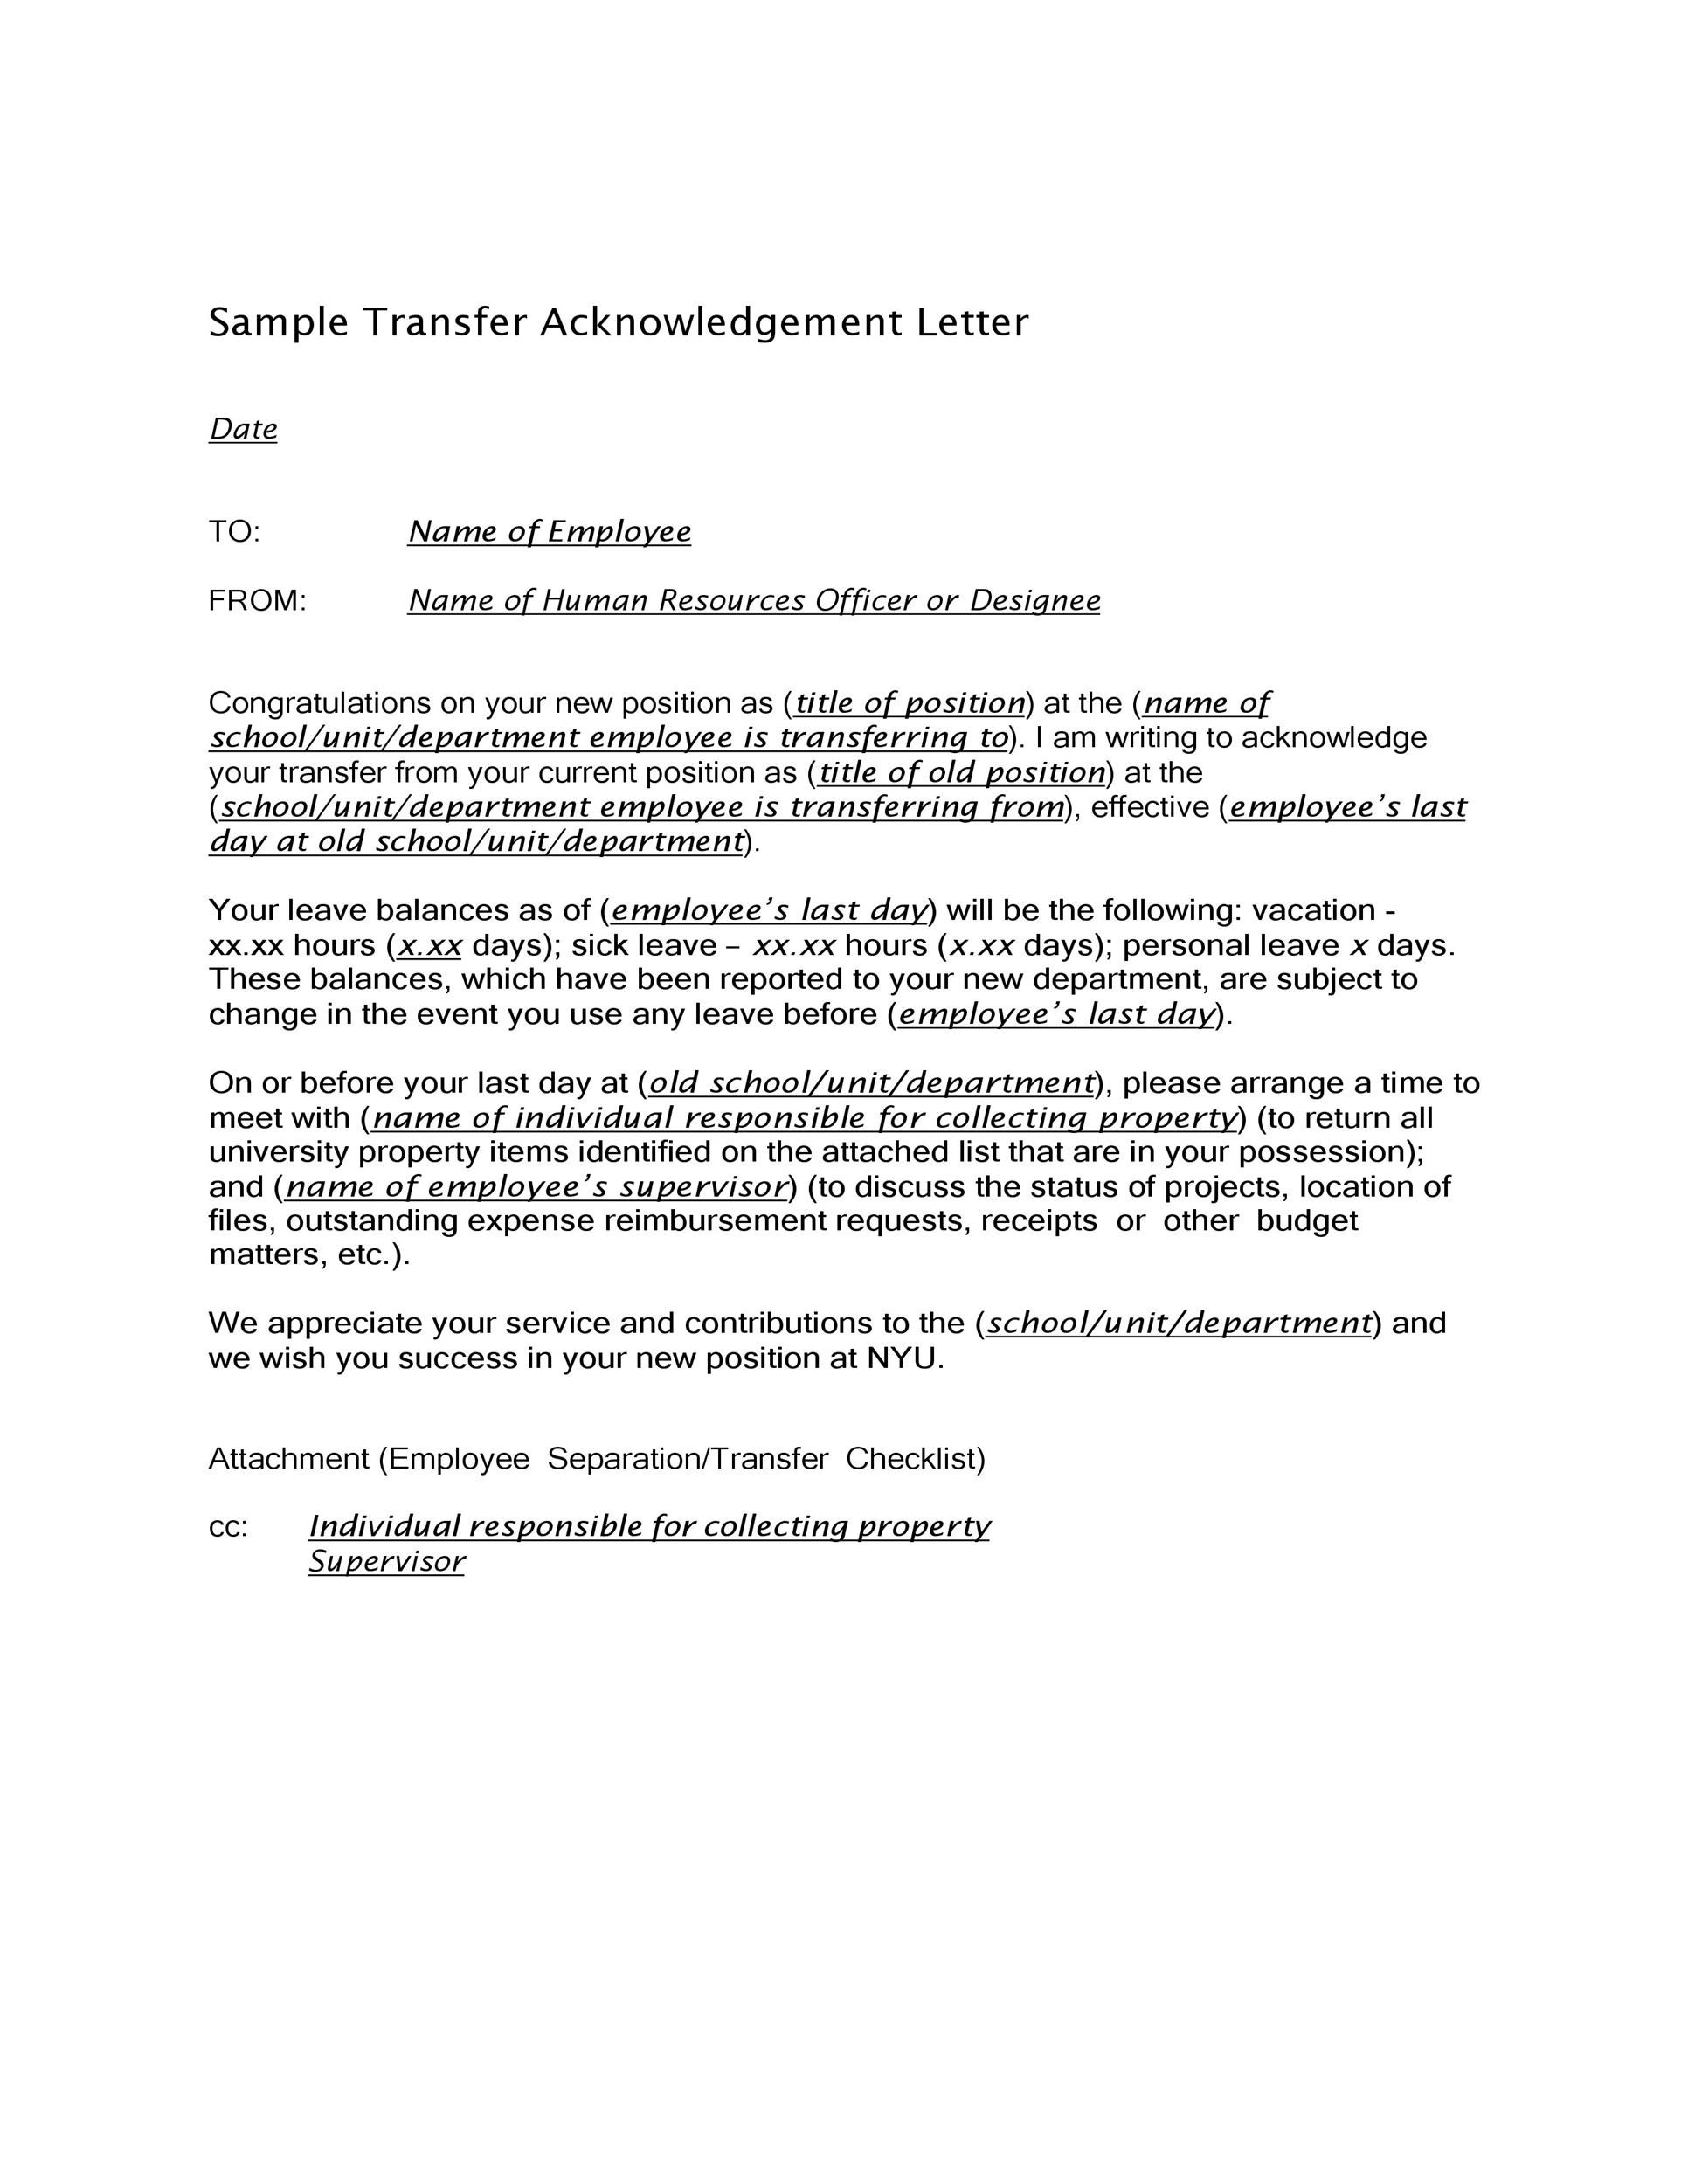 sample acknowledgement research paper